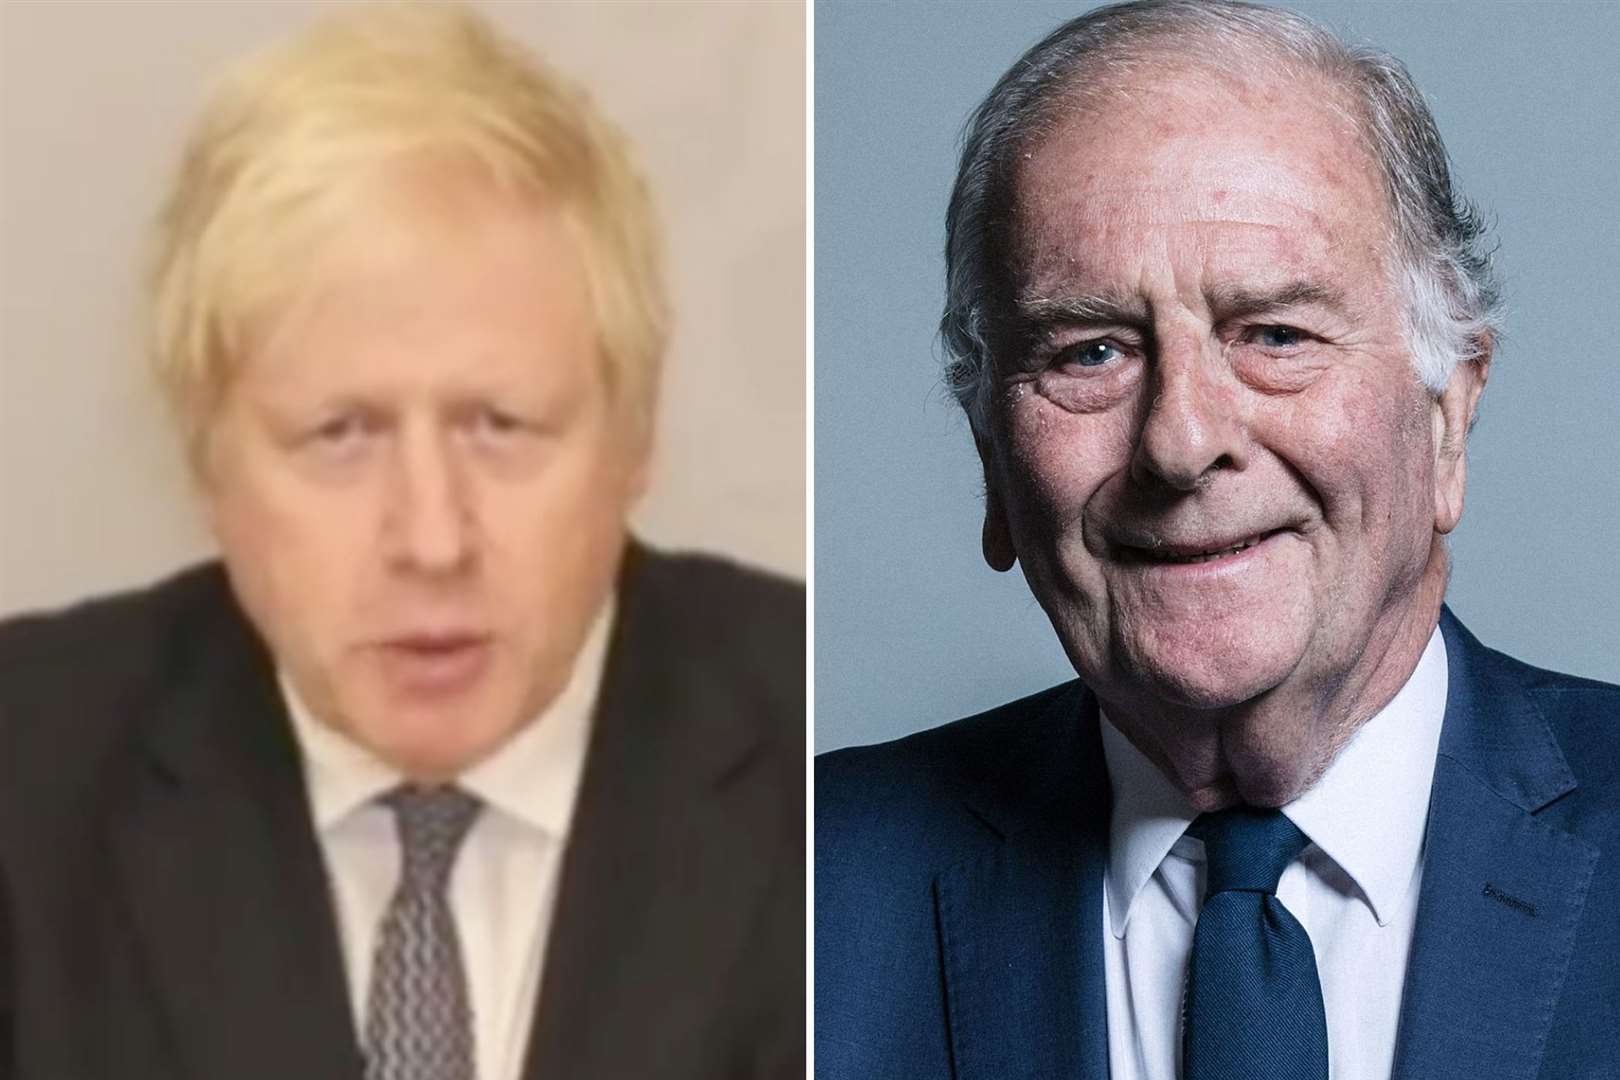 North Thanet MP Sir Roger Gale says it's time for Boris Johnson to go